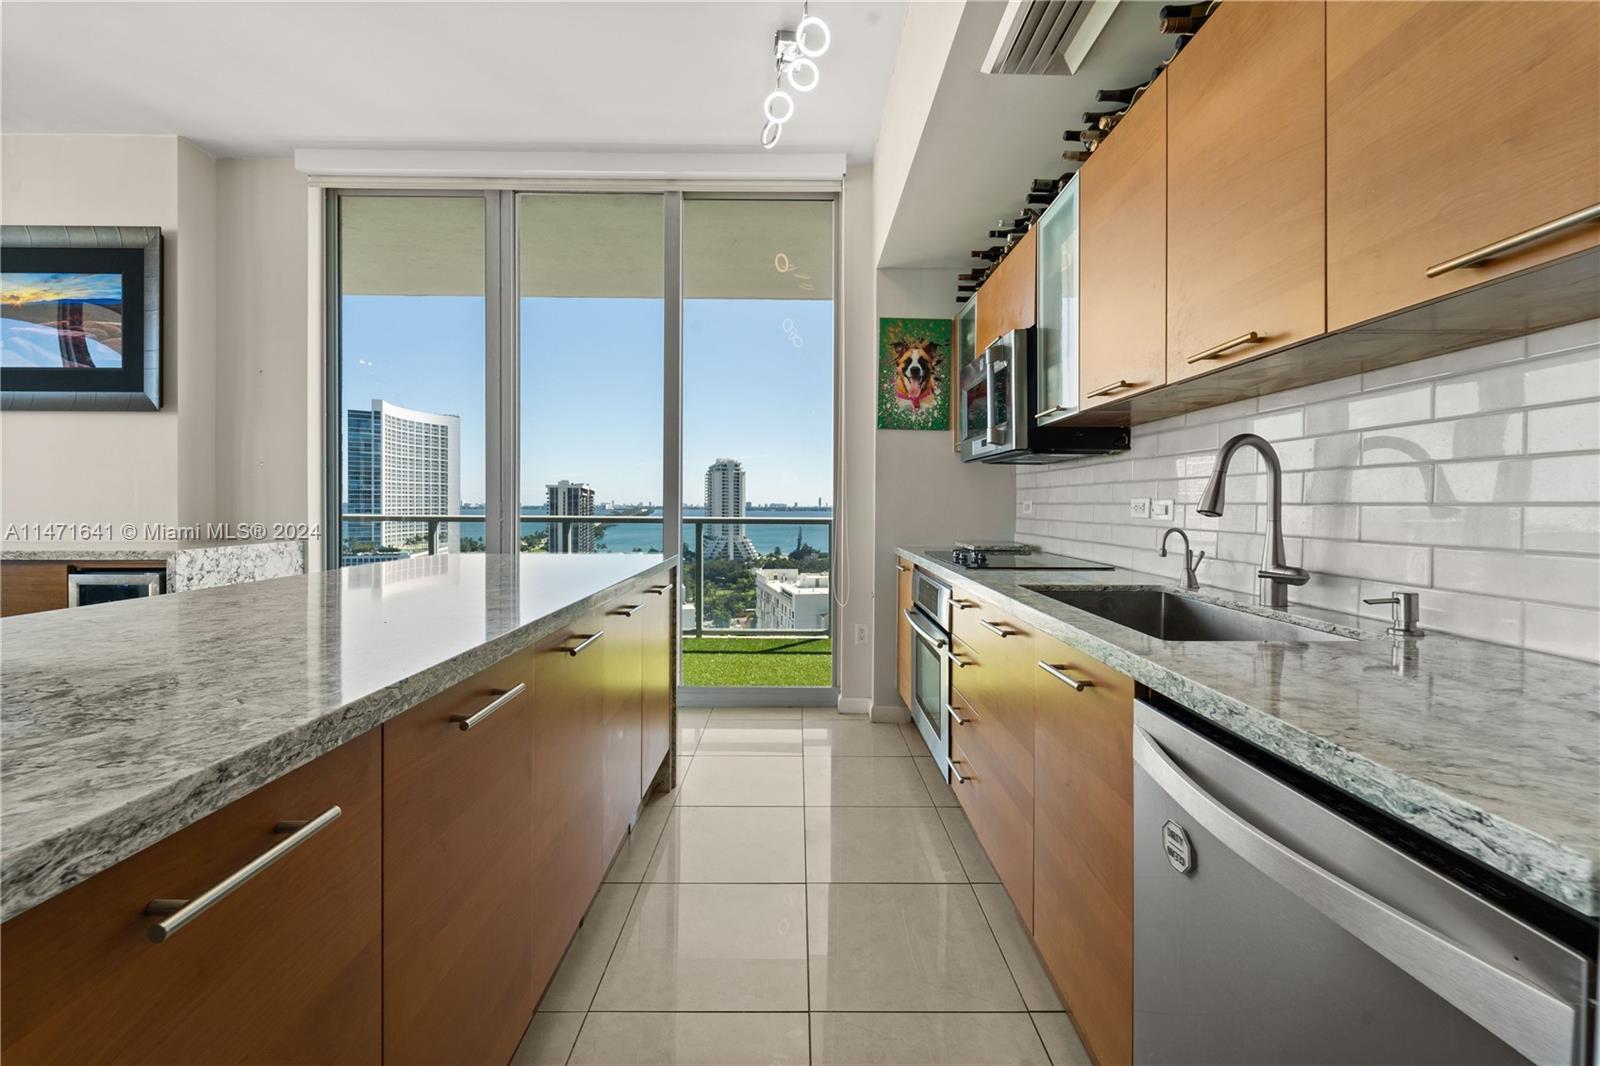 Overlooking the Miami Design District and Biscayne Bay from the 16th floor, discover your next home 